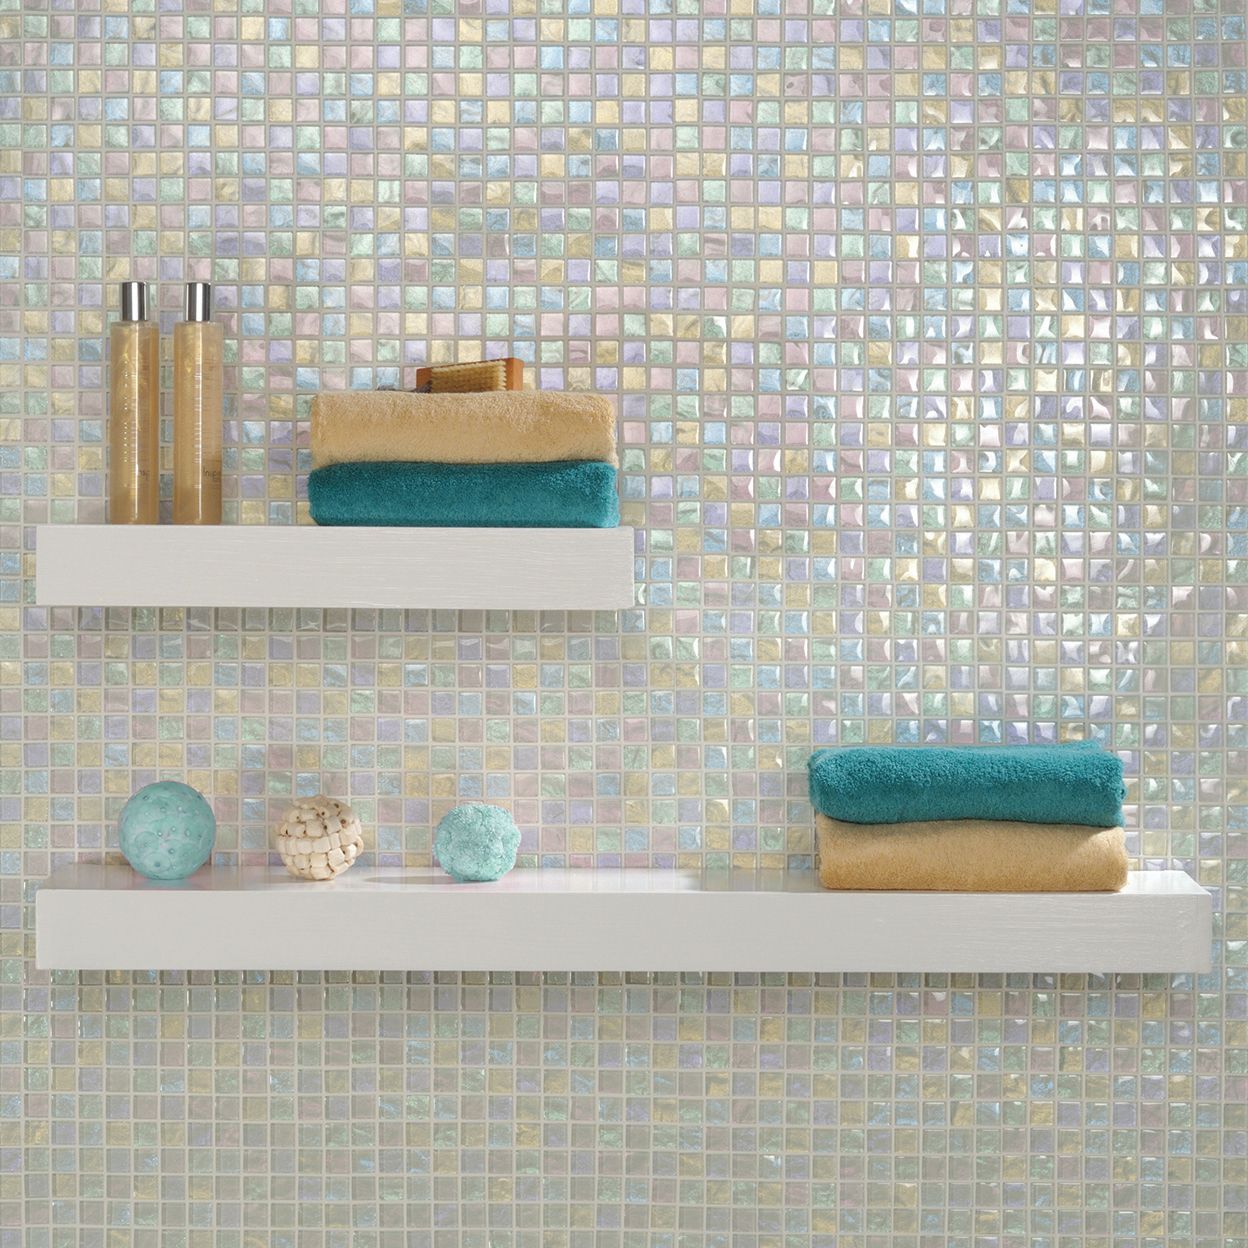 Mermaid chic. This beautiful iridescent tile from Mosaics Glassworks is